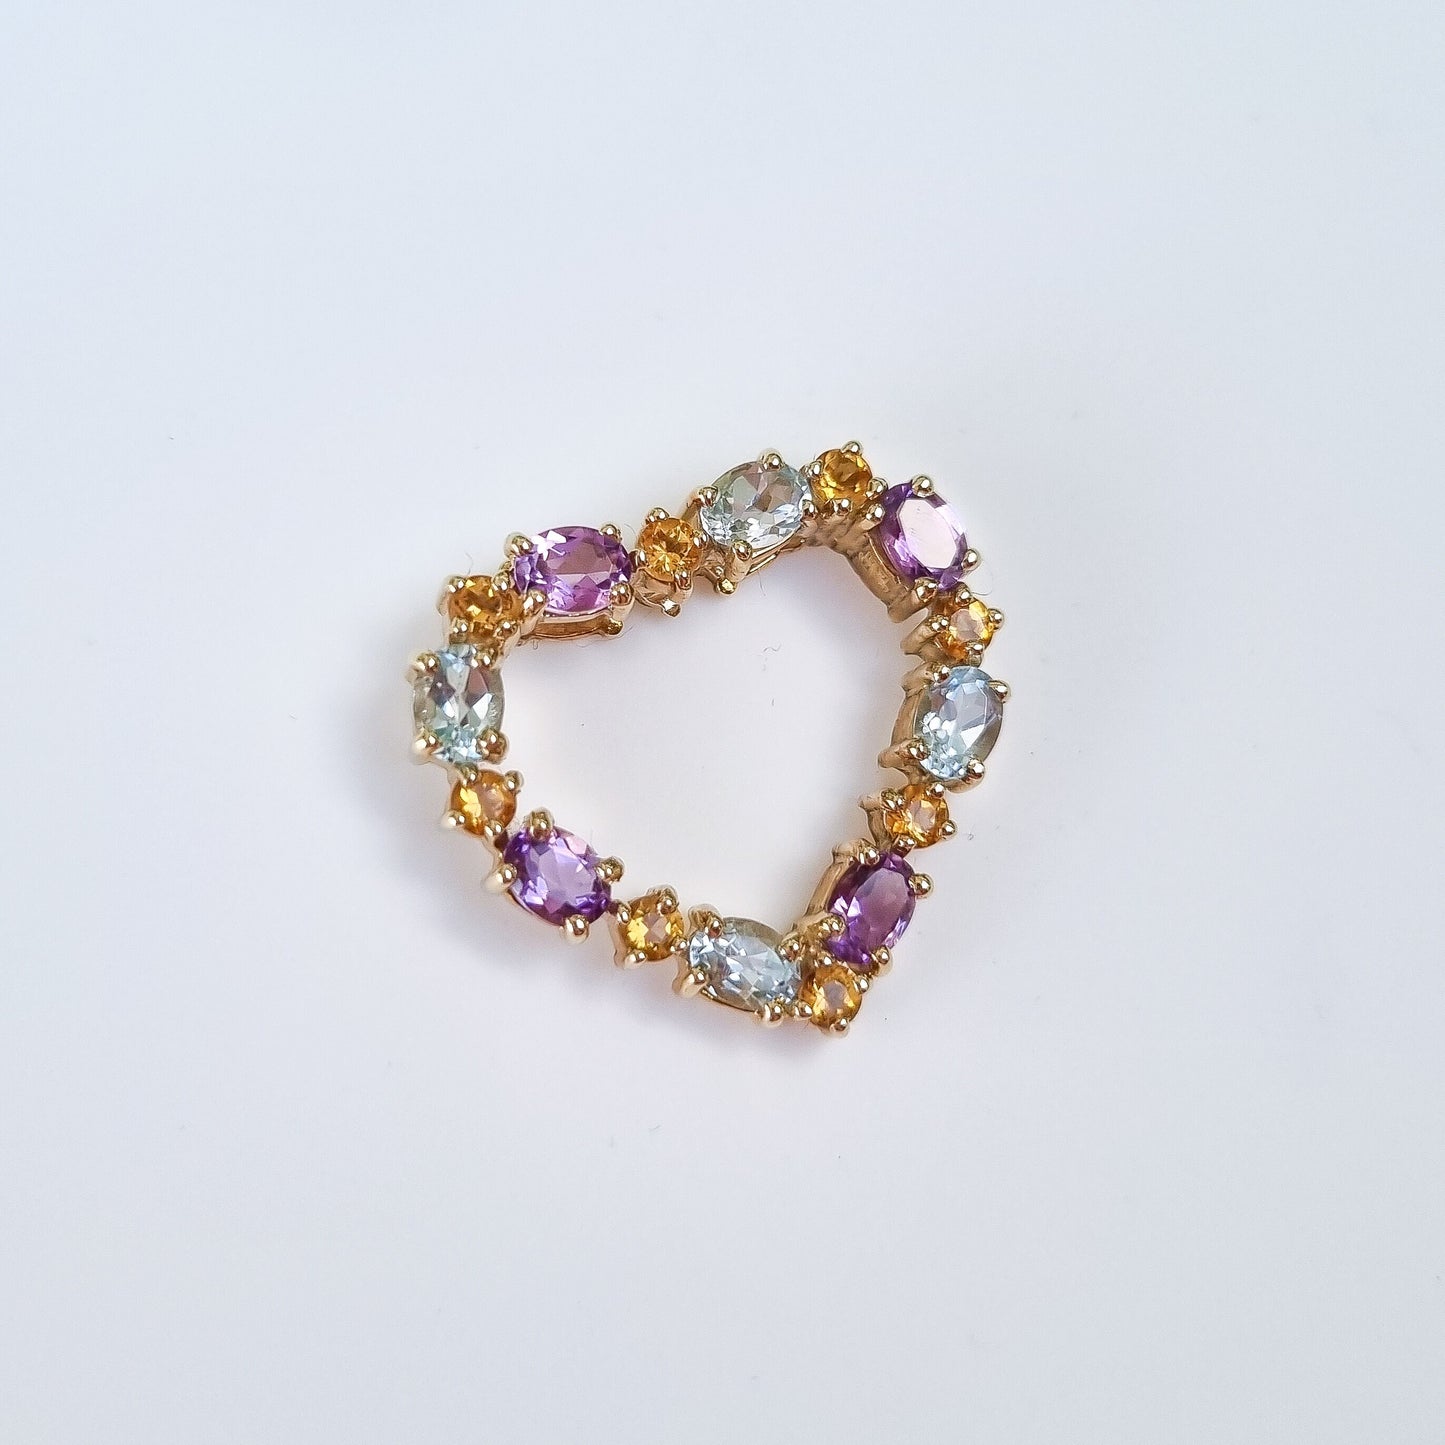 Vintage 9ct Heart Pendant with Blue Topaz, Amethyst and Citrine